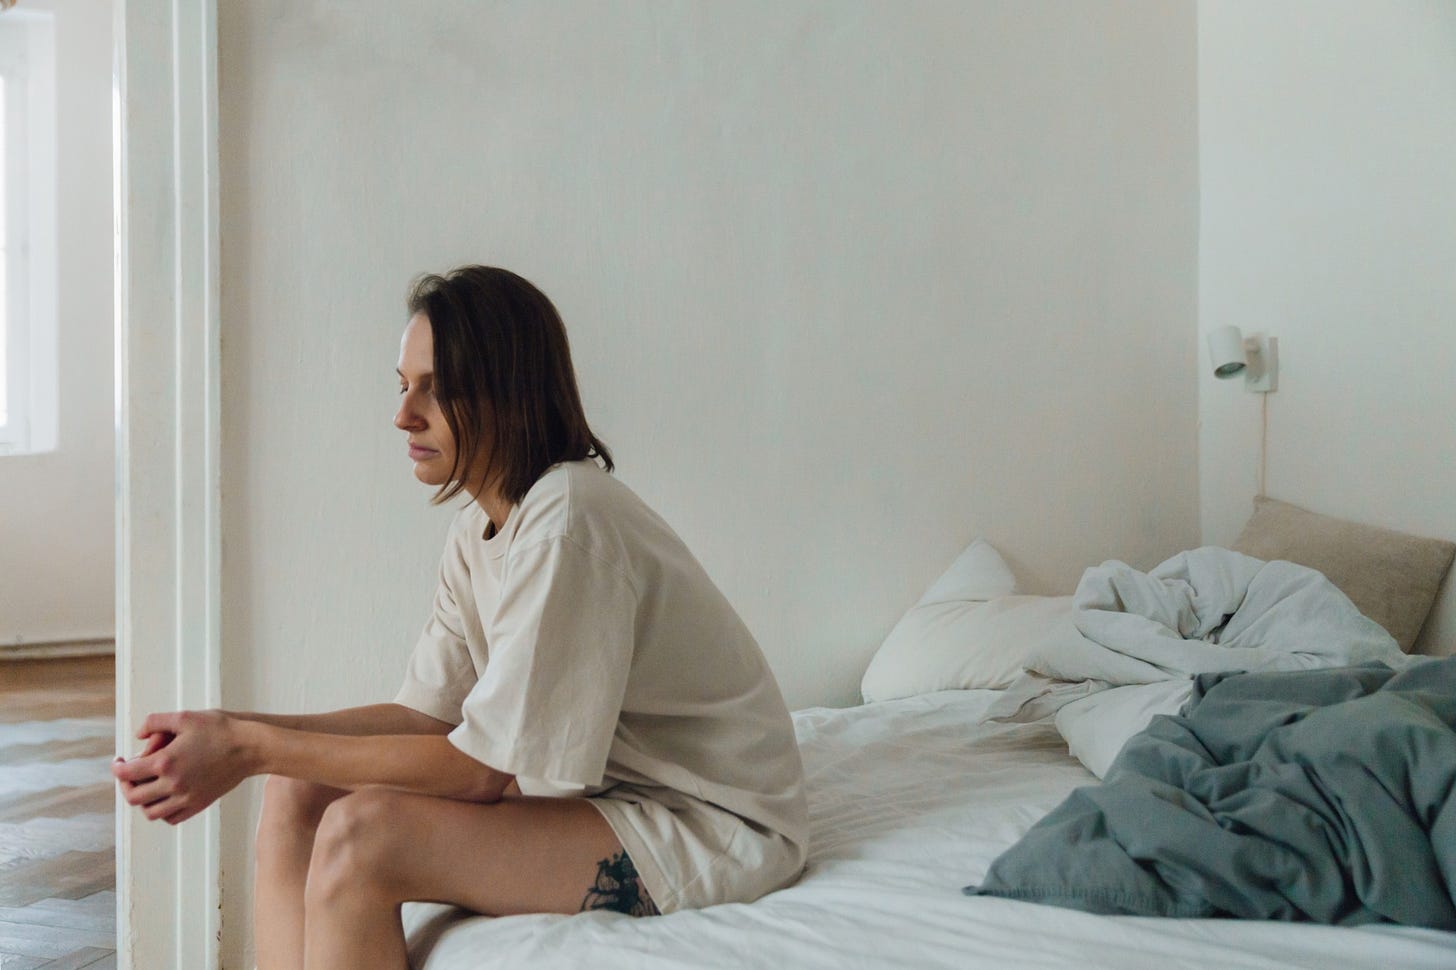 A woman in an oversized t-shirt sits sadly on the edge of a rumpled bed.